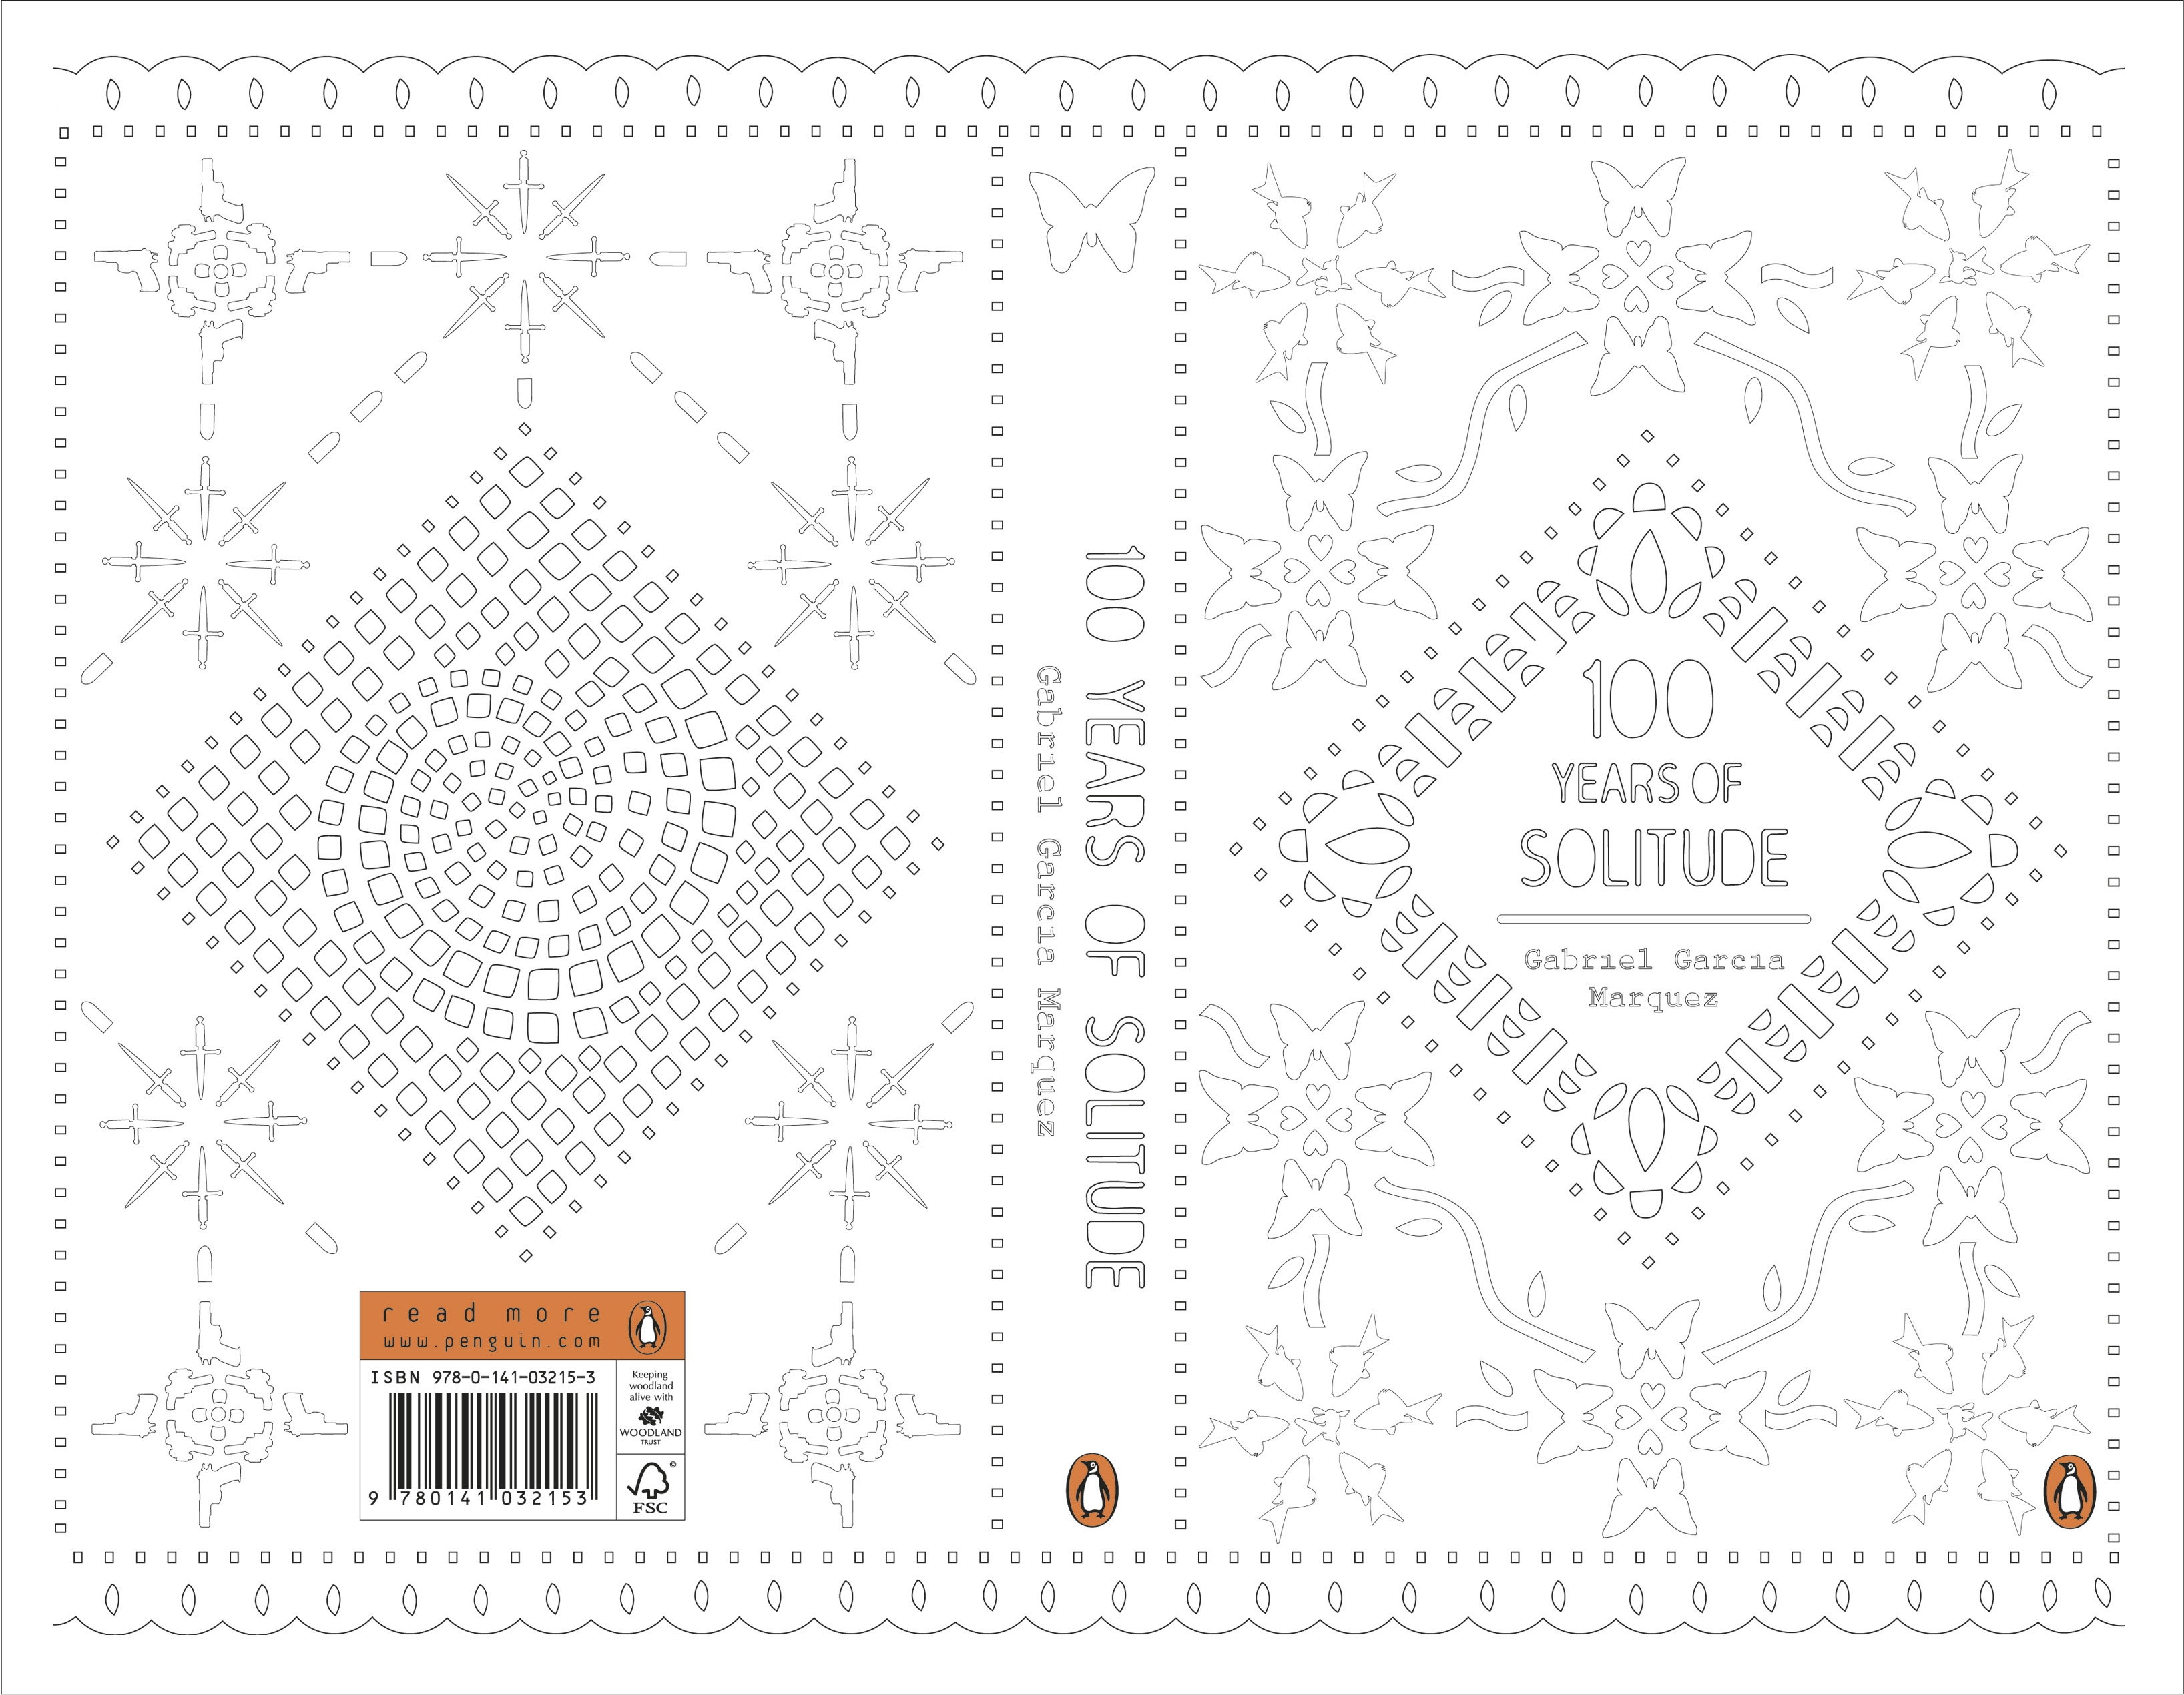 100 Years of Solitude book cover design